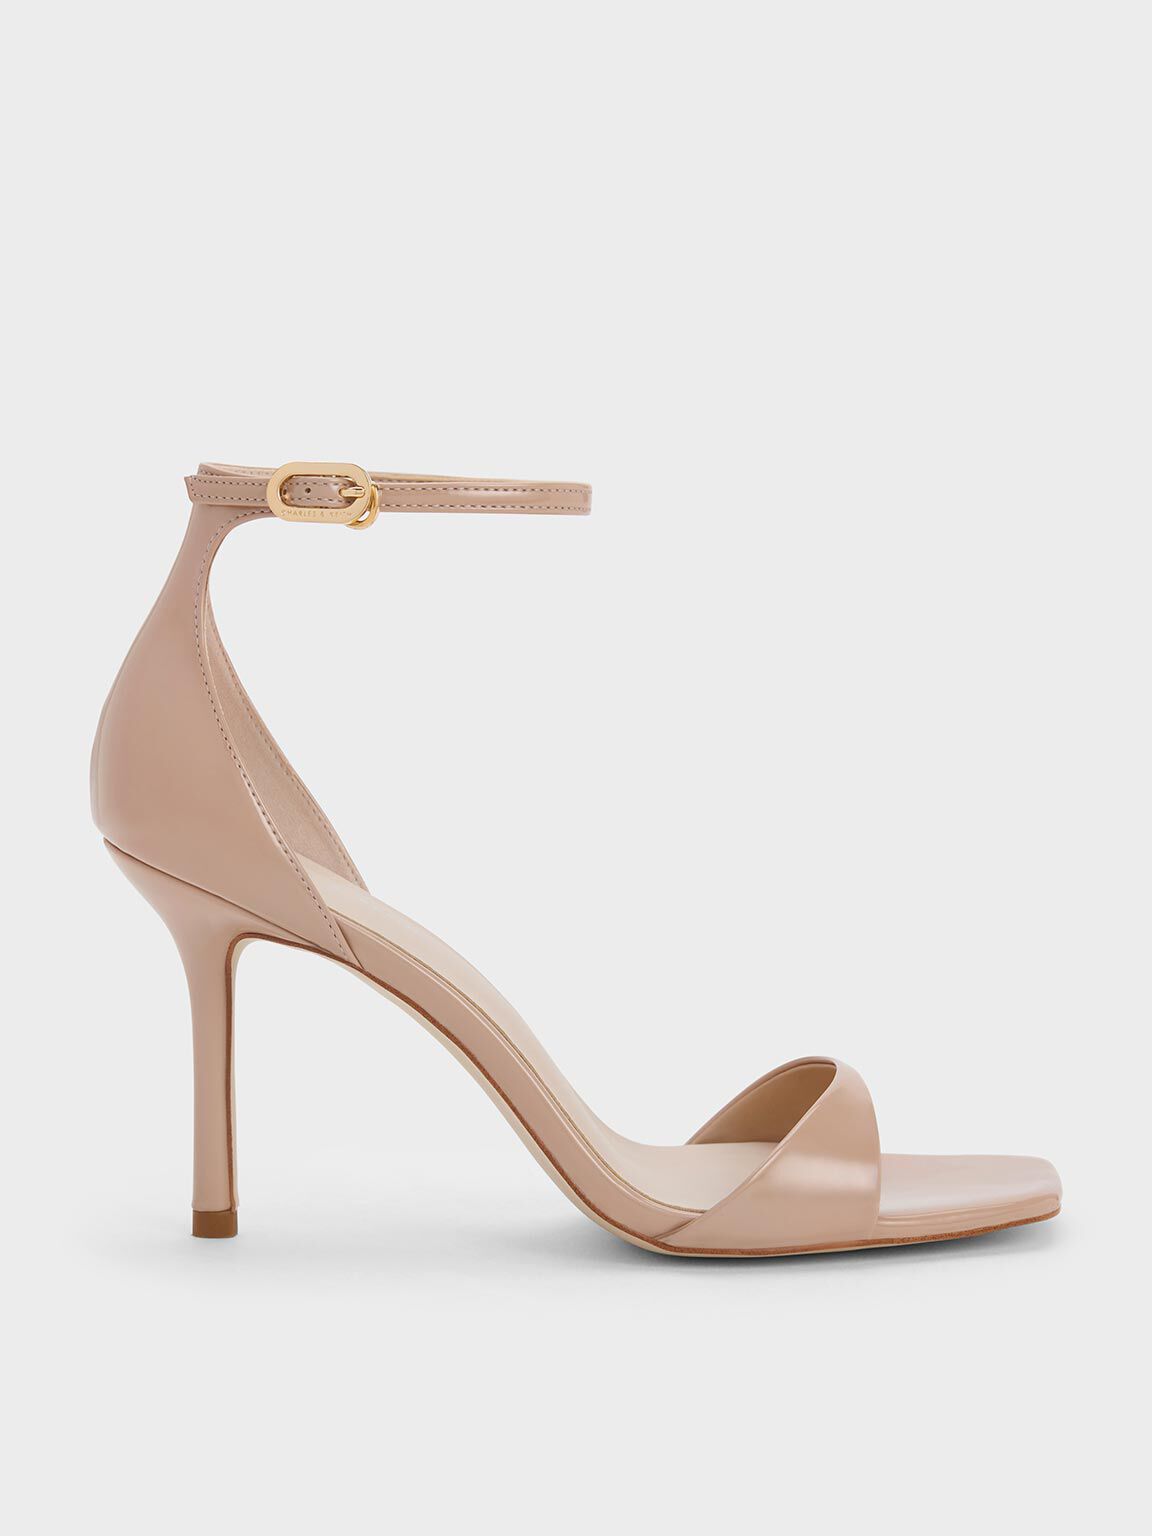 Why Heeled Sandals Are Single (strapped) This Season? | Fashion Tag